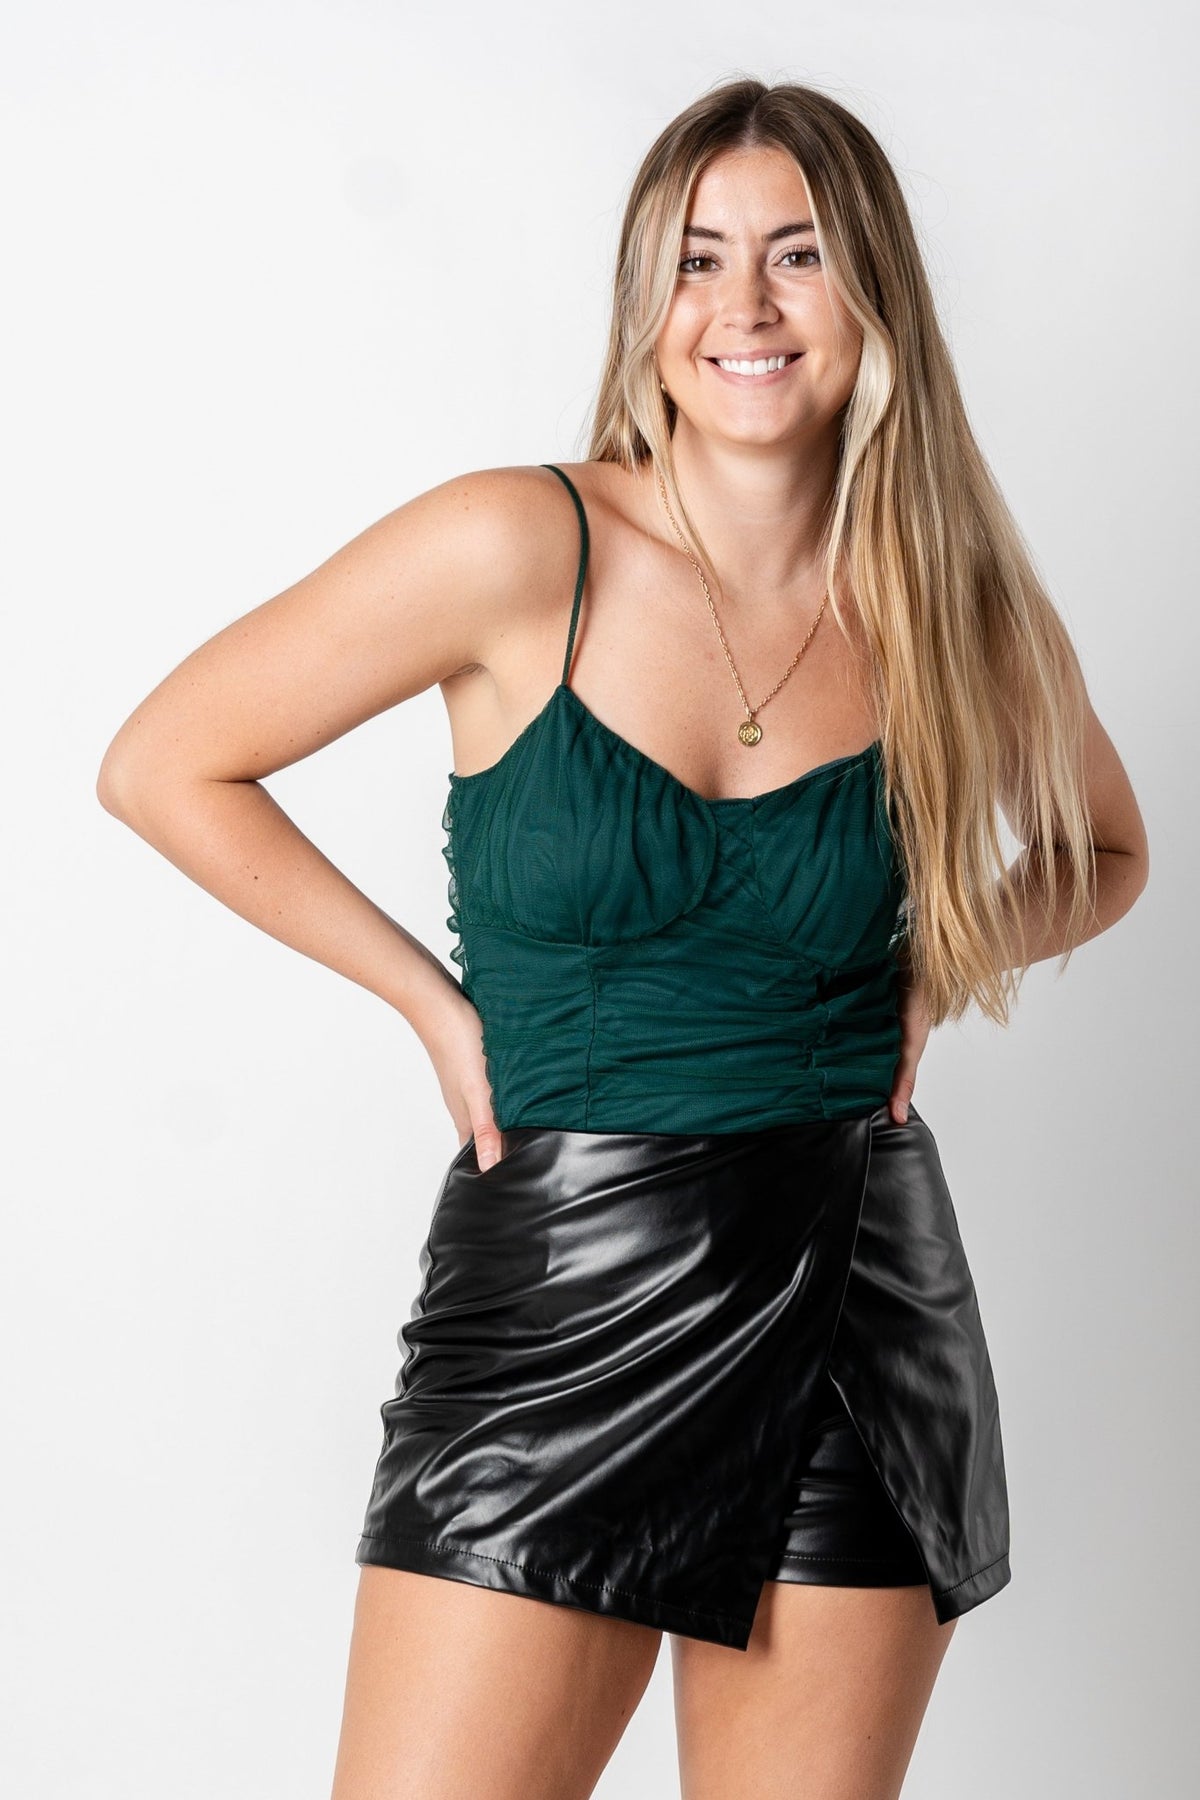 Ruched bodysuit hunter green - Trendy Holiday Apparel at Lush Fashion Lounge Boutique in Oklahoma City